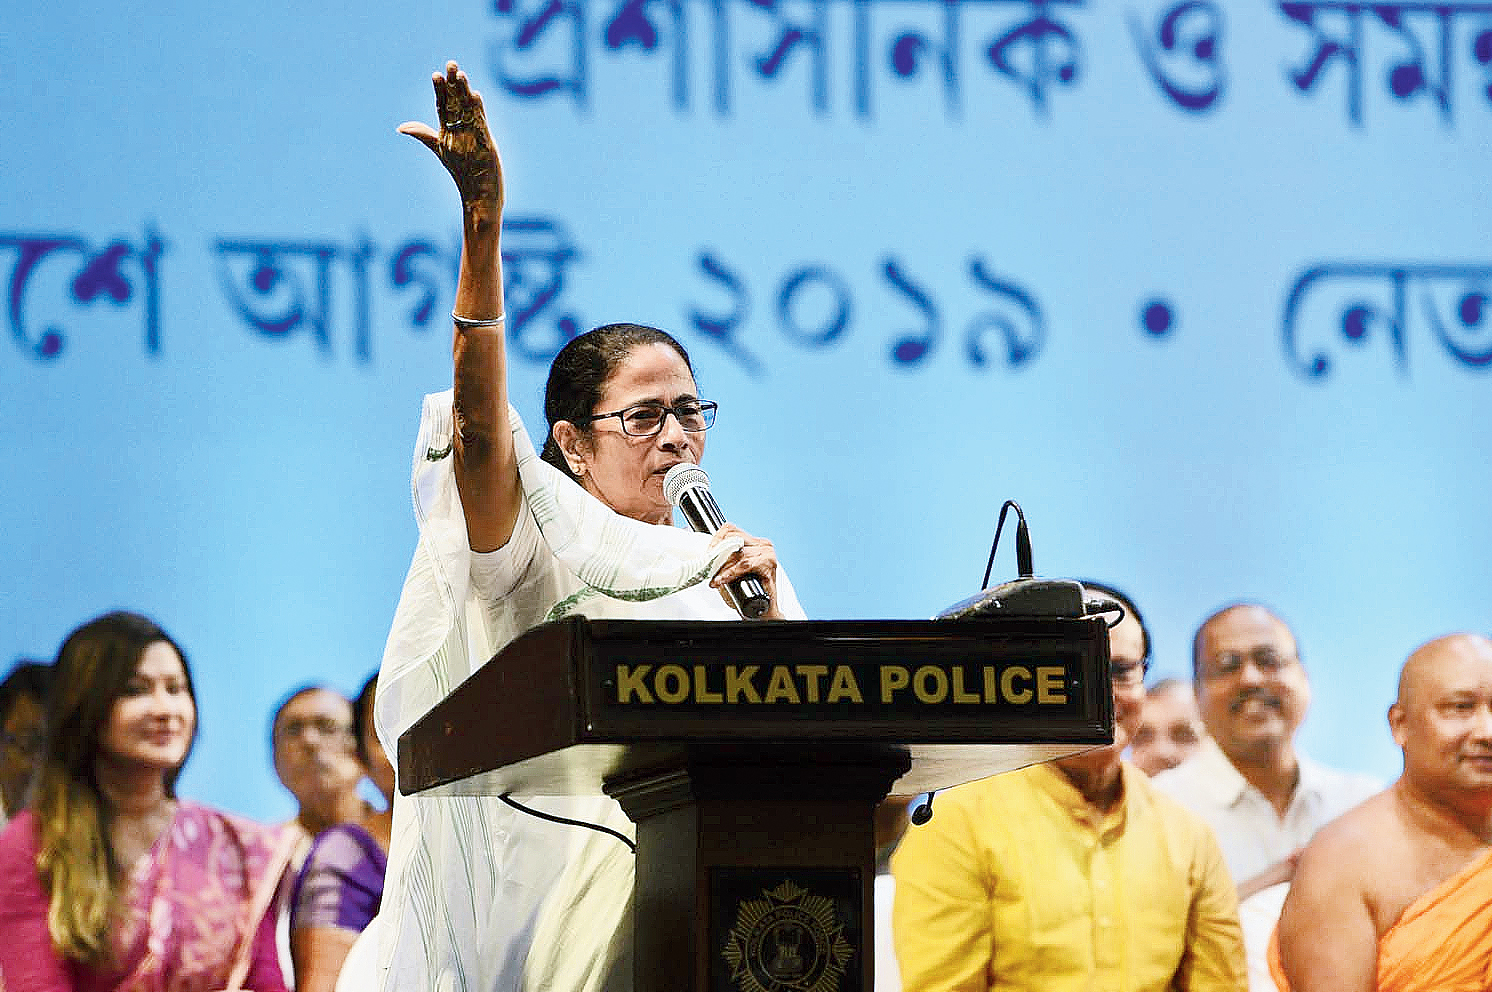 Chief minister Mamata Banerjee raises her hand to seek mandate from the audience on whether VIP passes and gates would be done away with during this year’s Durga Puja.